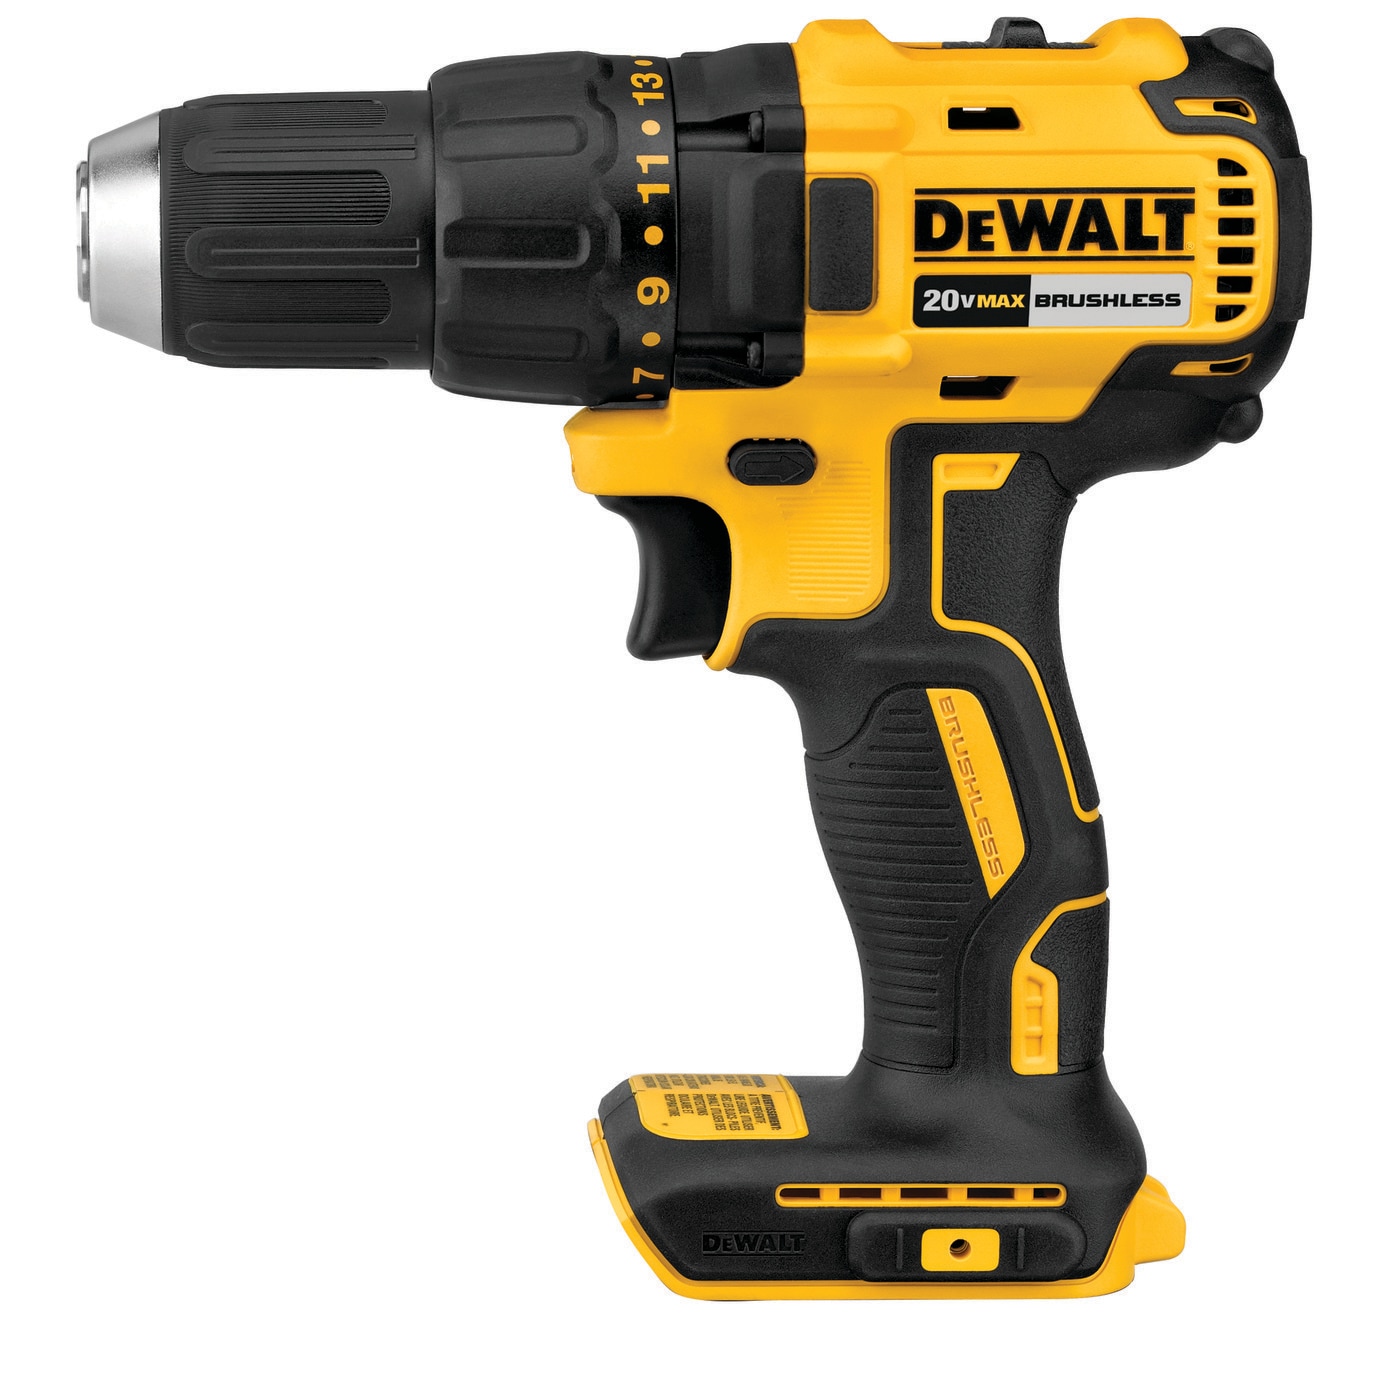 DEWALT 20-volt Max 1/2-in Brushless Cordless Drill (Bare Tool) the Drills department at Lowes.com